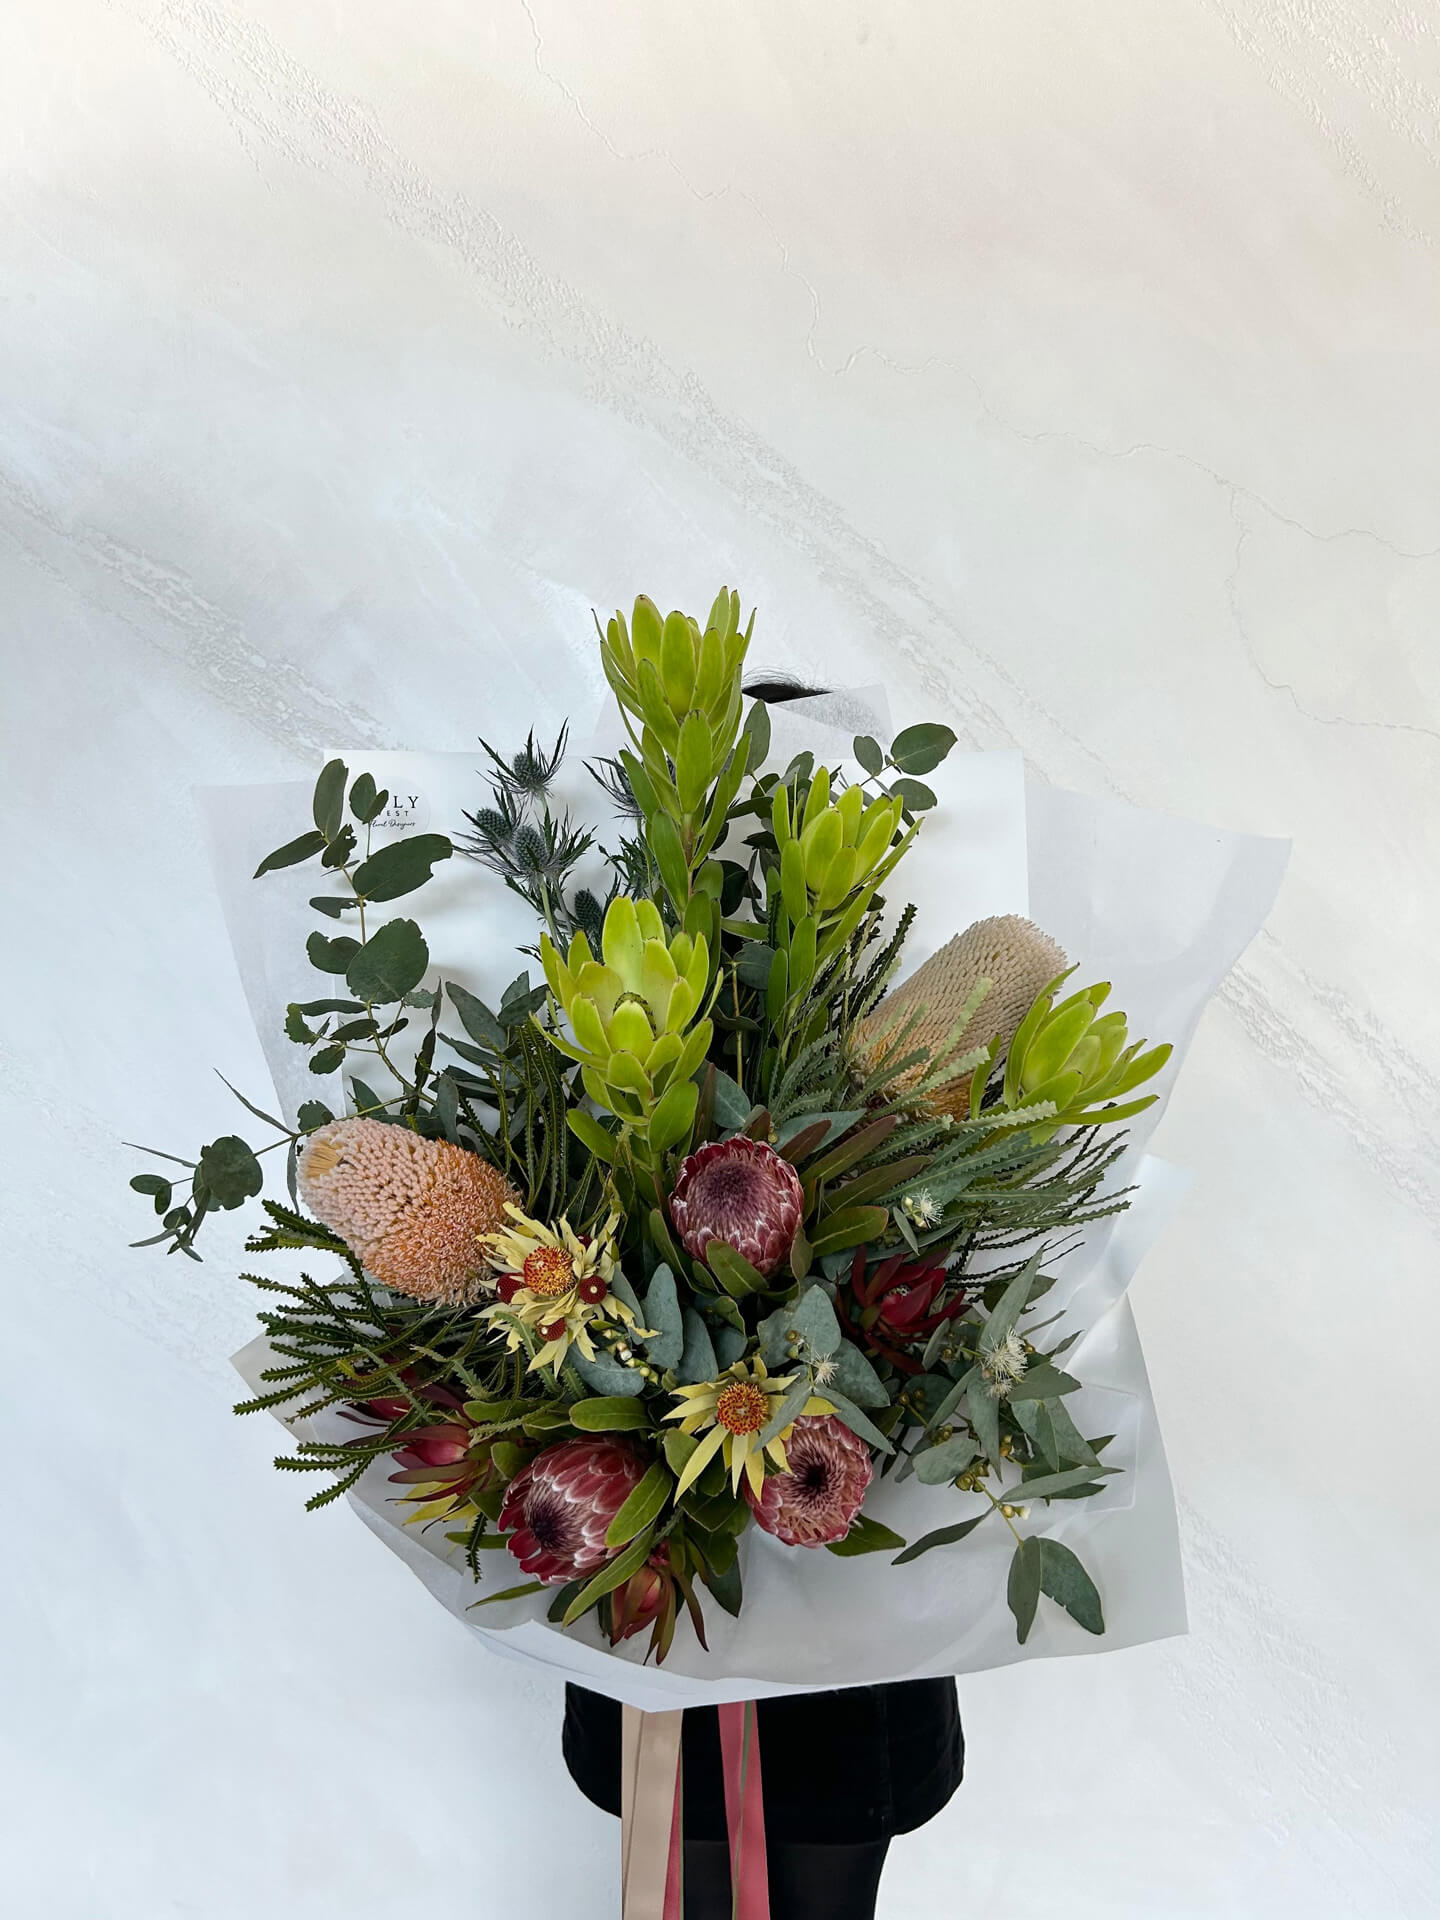 Large bouquet made with seasonal native flowers.